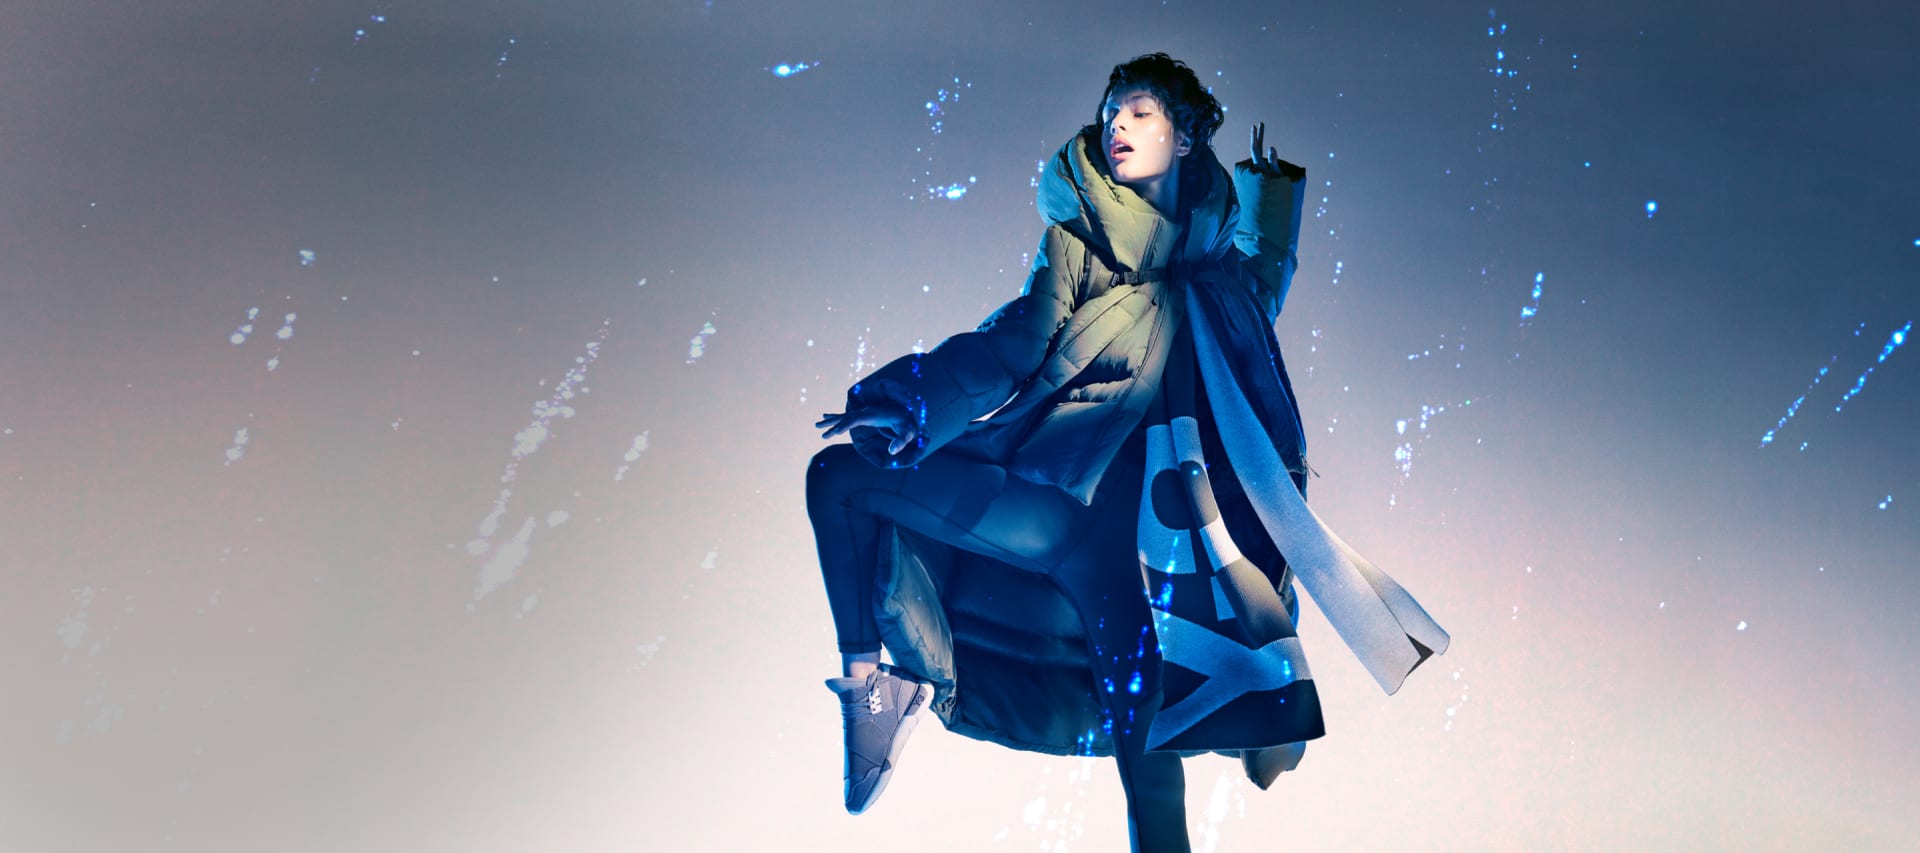 A woman dances passionately in an adidas Y-3 puffer jacket and sneakers while the rain falls around her.